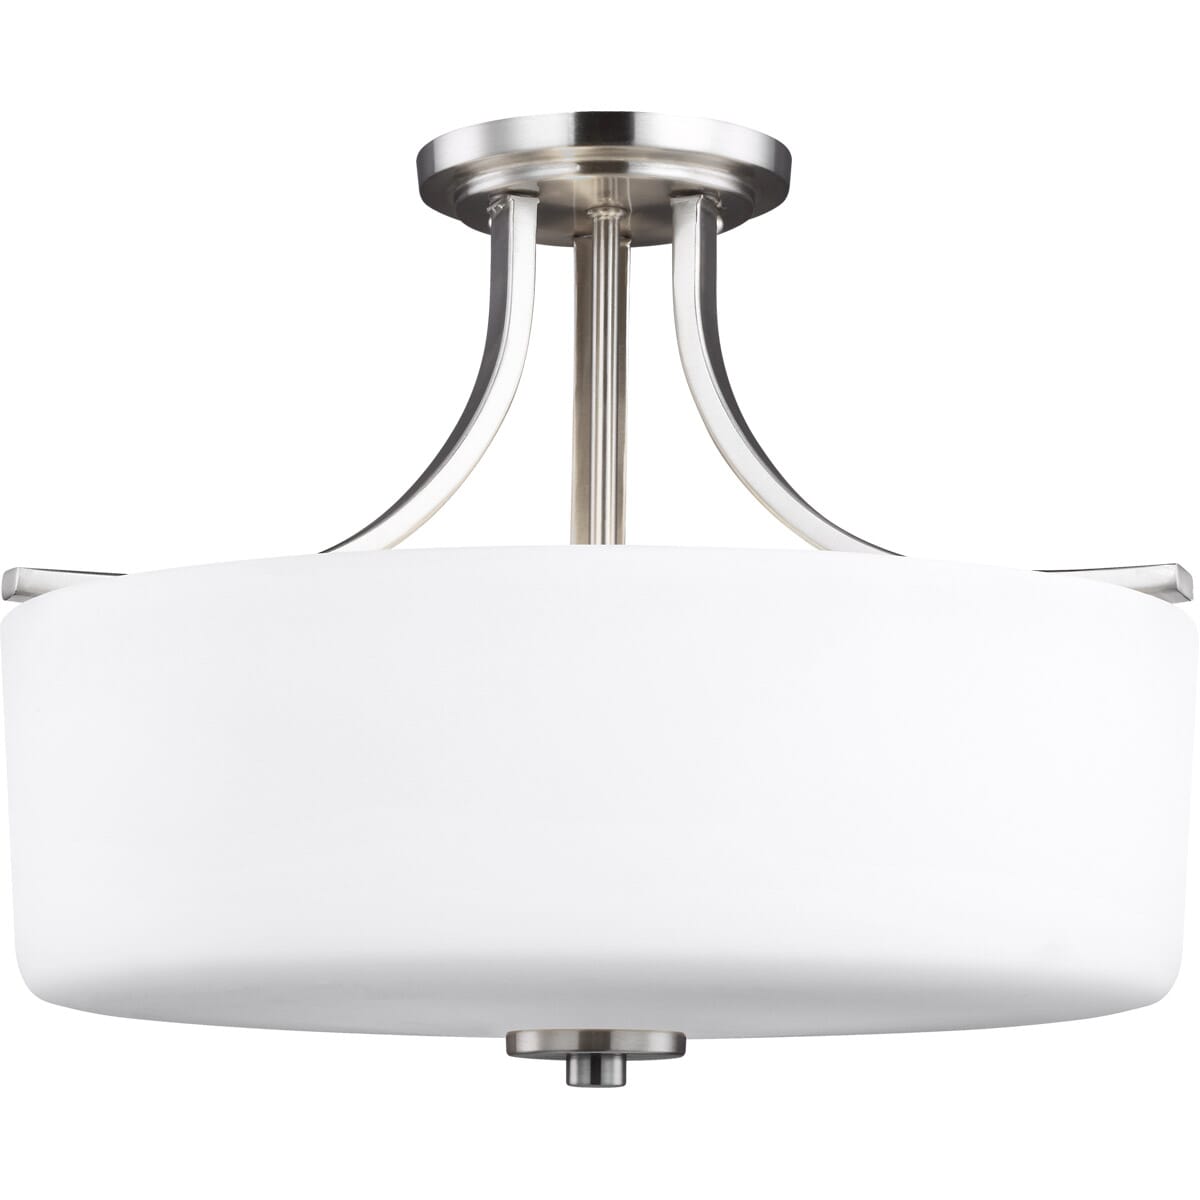 Canfield 3-Light Ceiling Light in Brushed Nickel